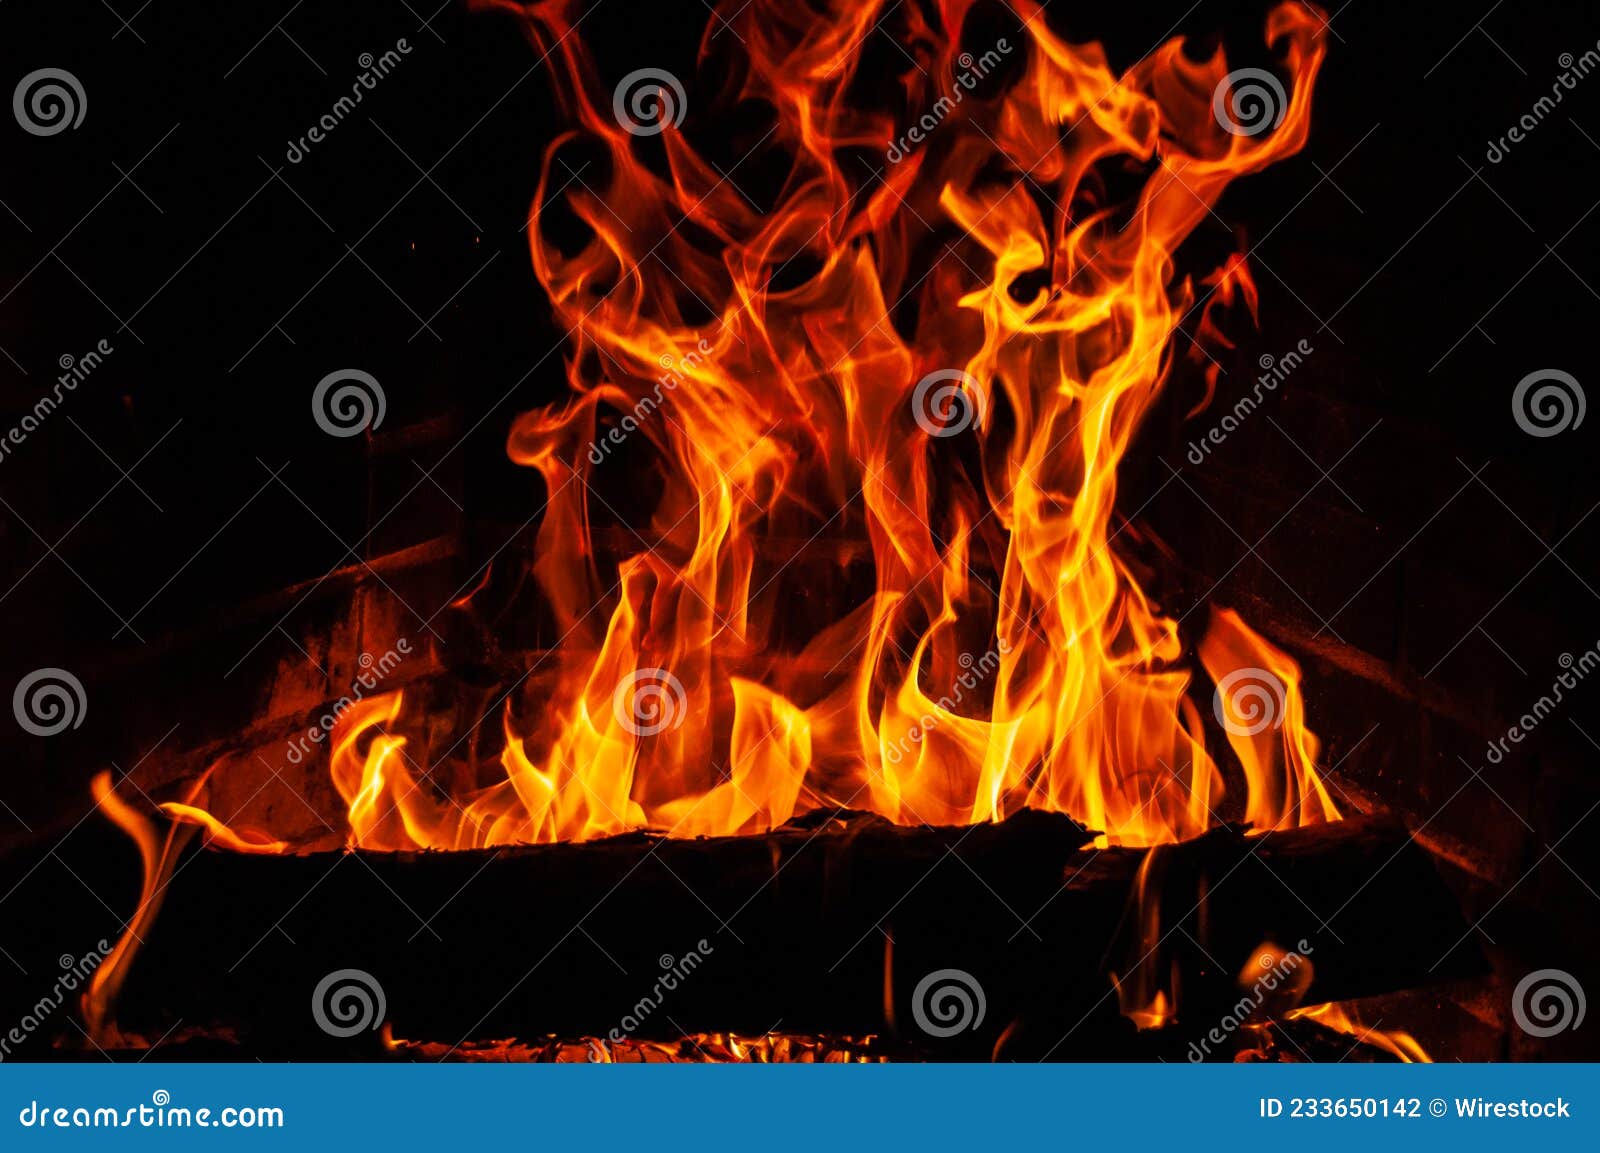 Fire Wallpaper with Black Background Fireplace Stock Photo - Image of  danger, effect: 233650142